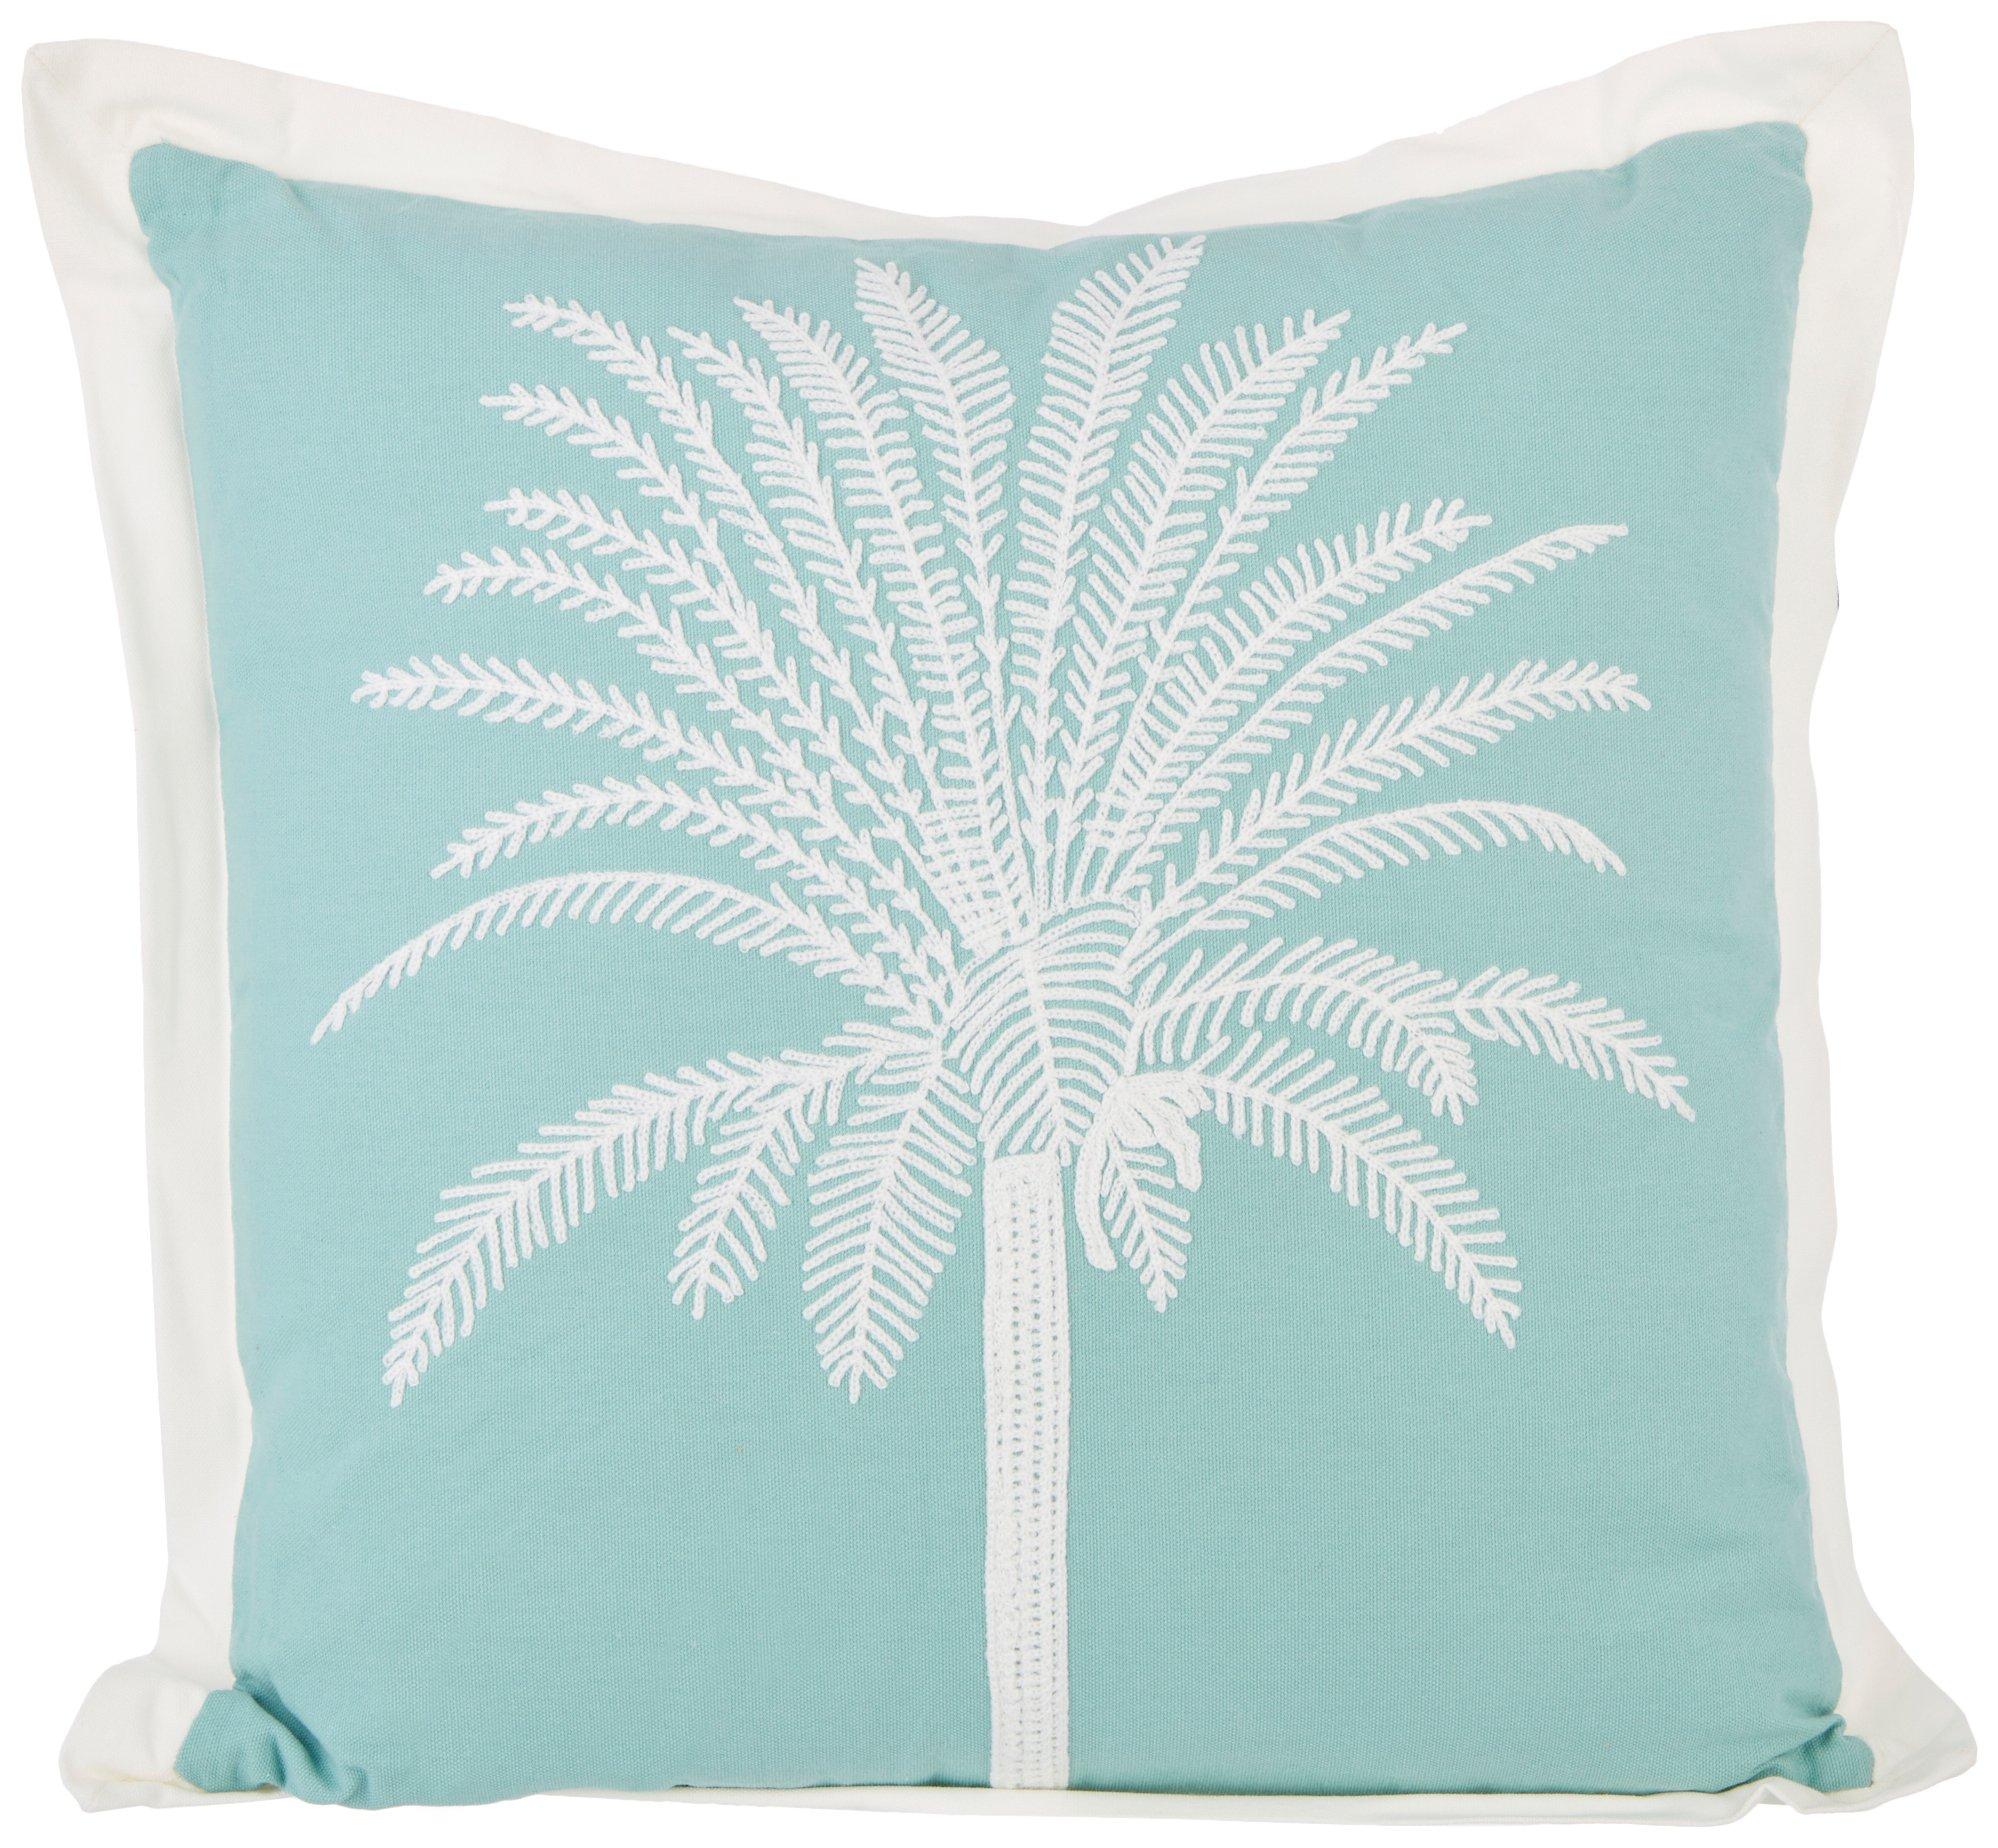 18x18 Embroidered Palm Tree Decorative Pillow